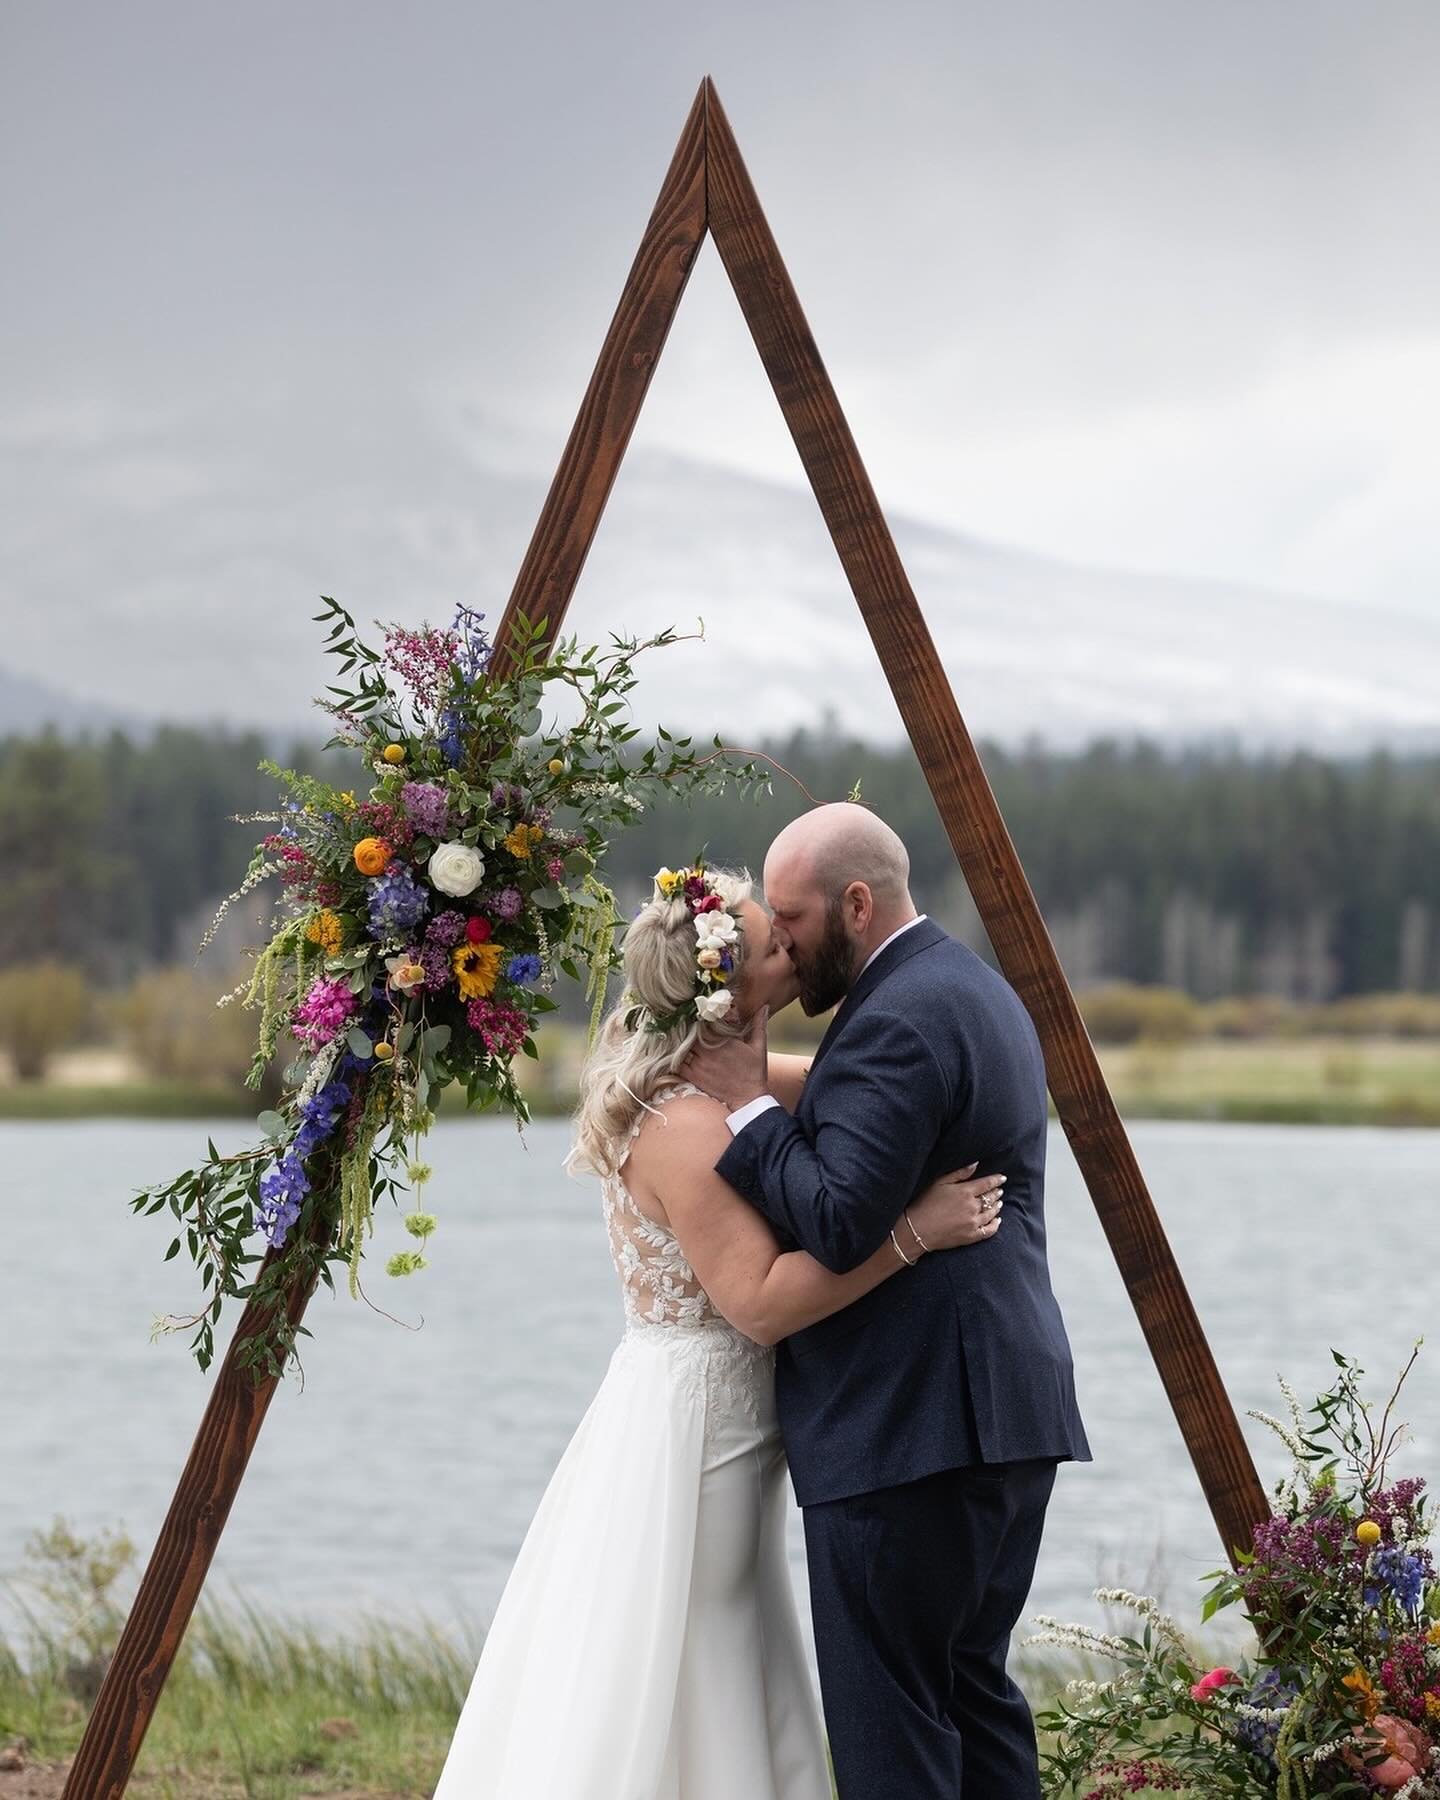 Our Mountain Peak Arbor is a classic backdrop for any ceremony.. Cheers to the MacRae&rsquo;s! 
⠀⠀⠀⠀⠀⠀⠀⠀⠀
@karleyjoanweddings
@blackbutteranchweddings
@lush_salon_bend
@woodlandfloraldesign
@flipflopsounds
📷 @four_eyes_photographer